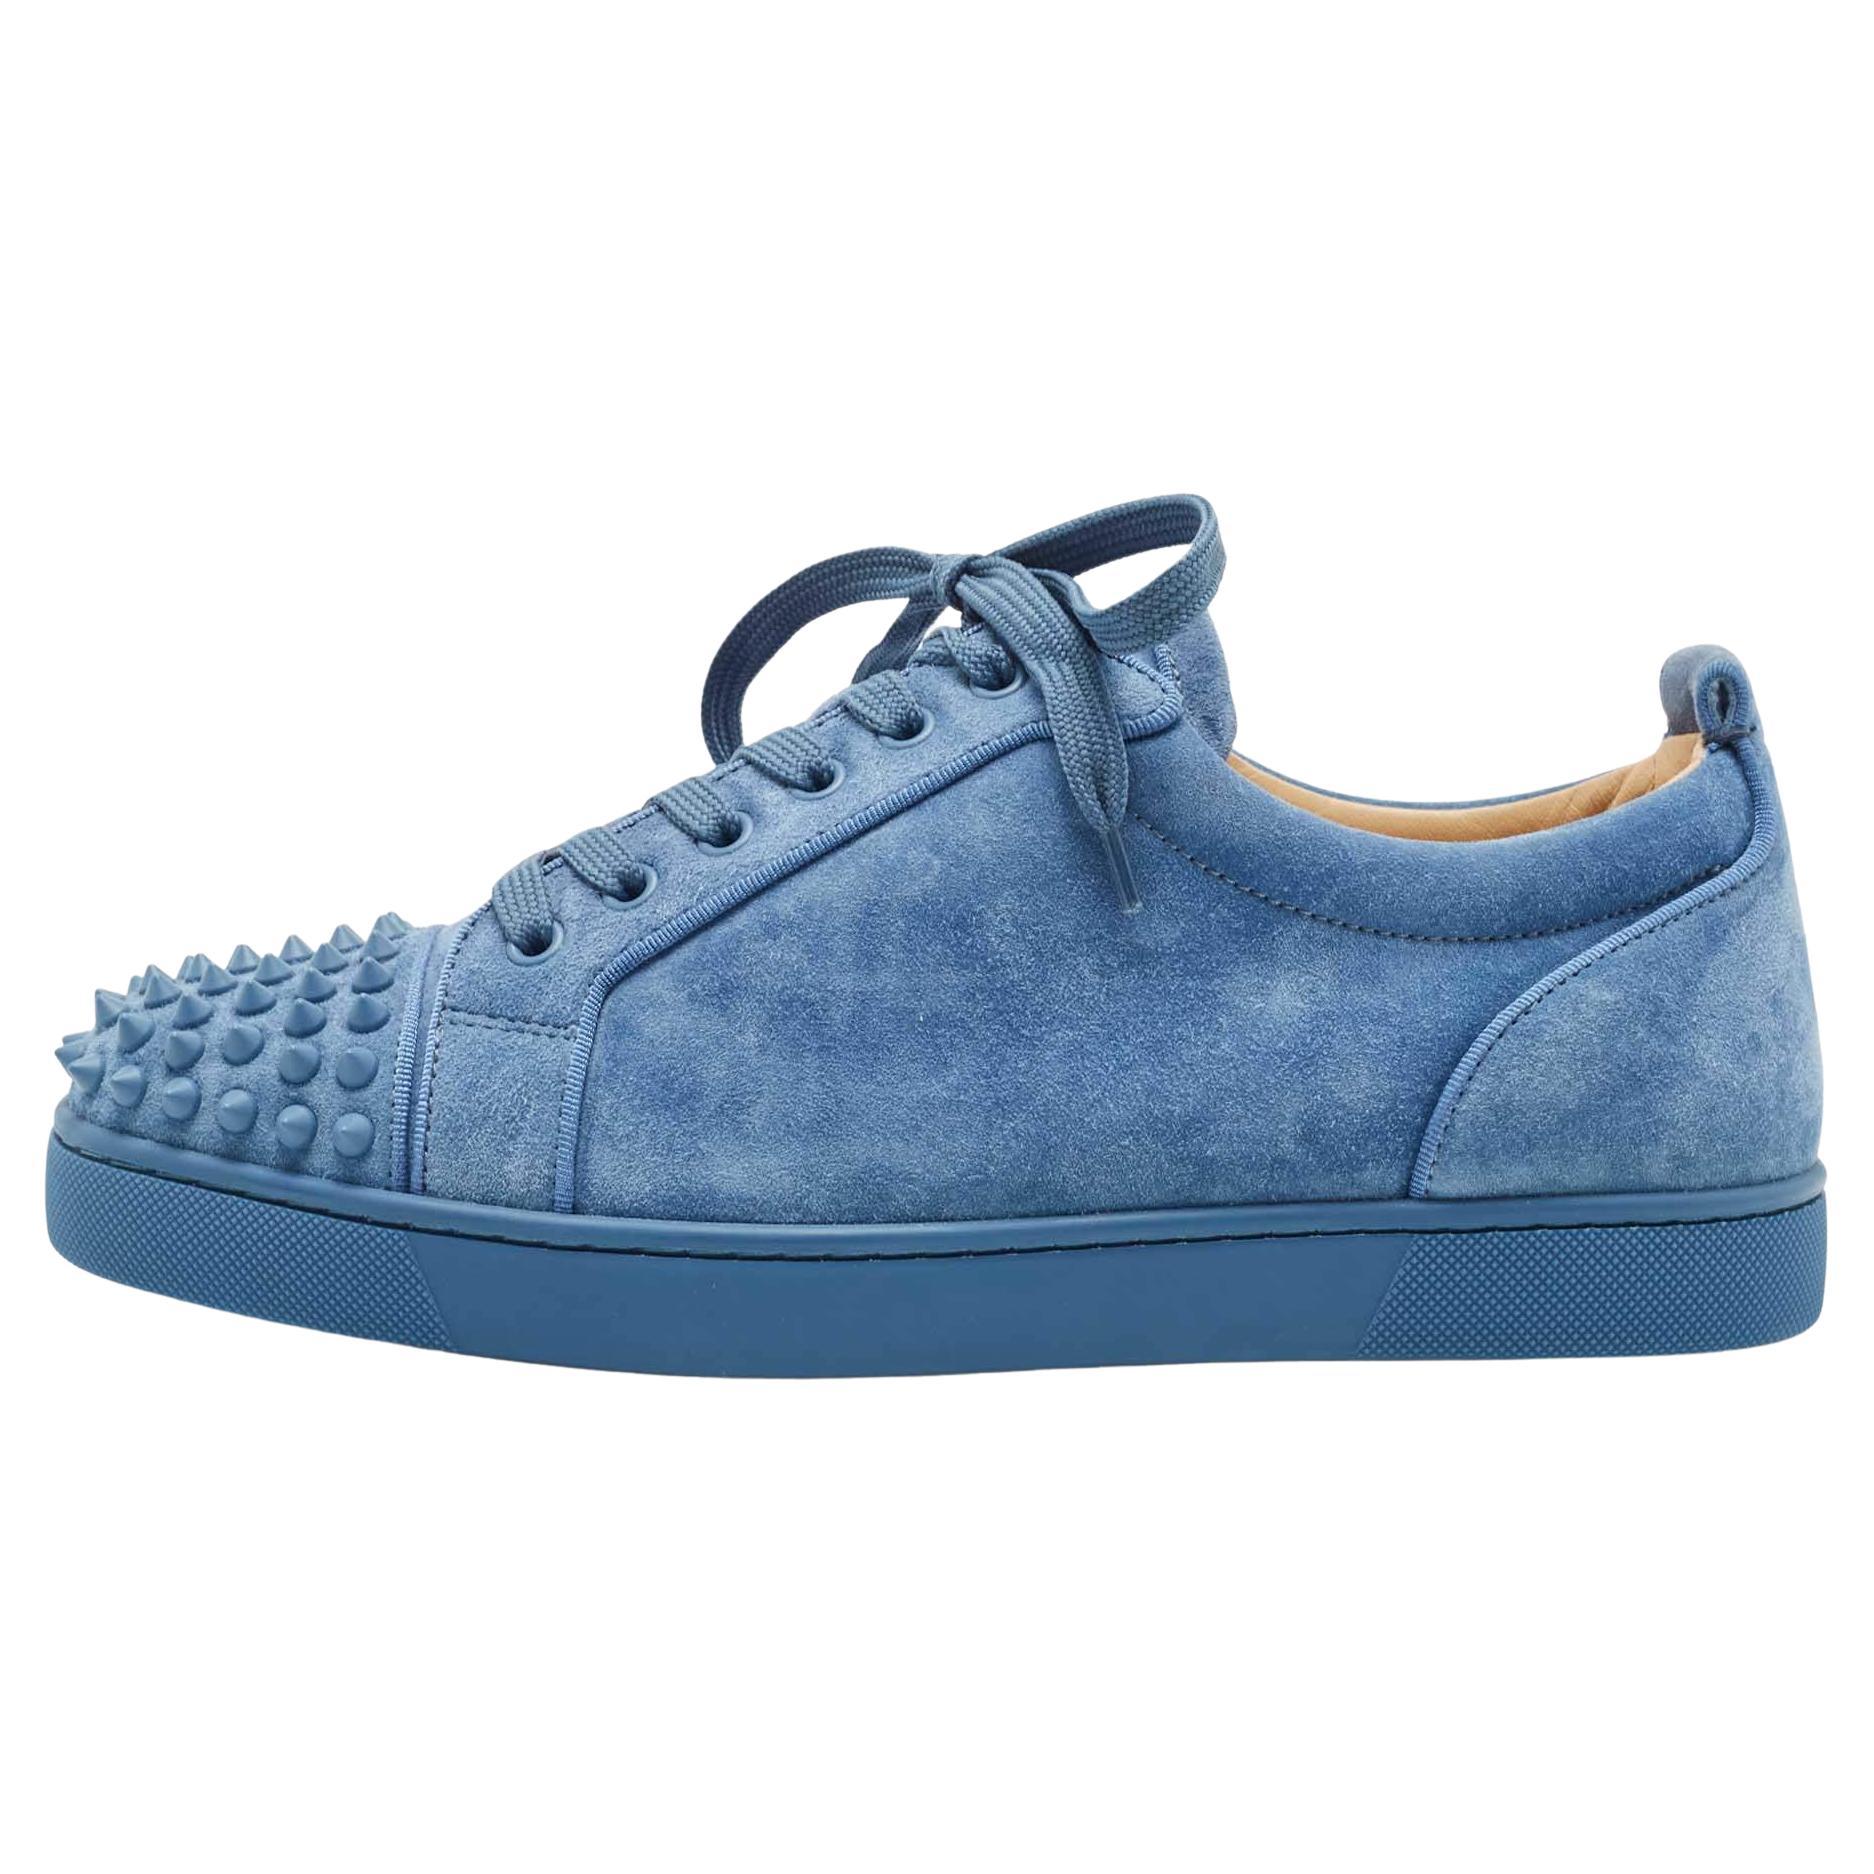 Christian Louboutin Blue Suede Louis Junior Spikes Sneakers Size 40.5